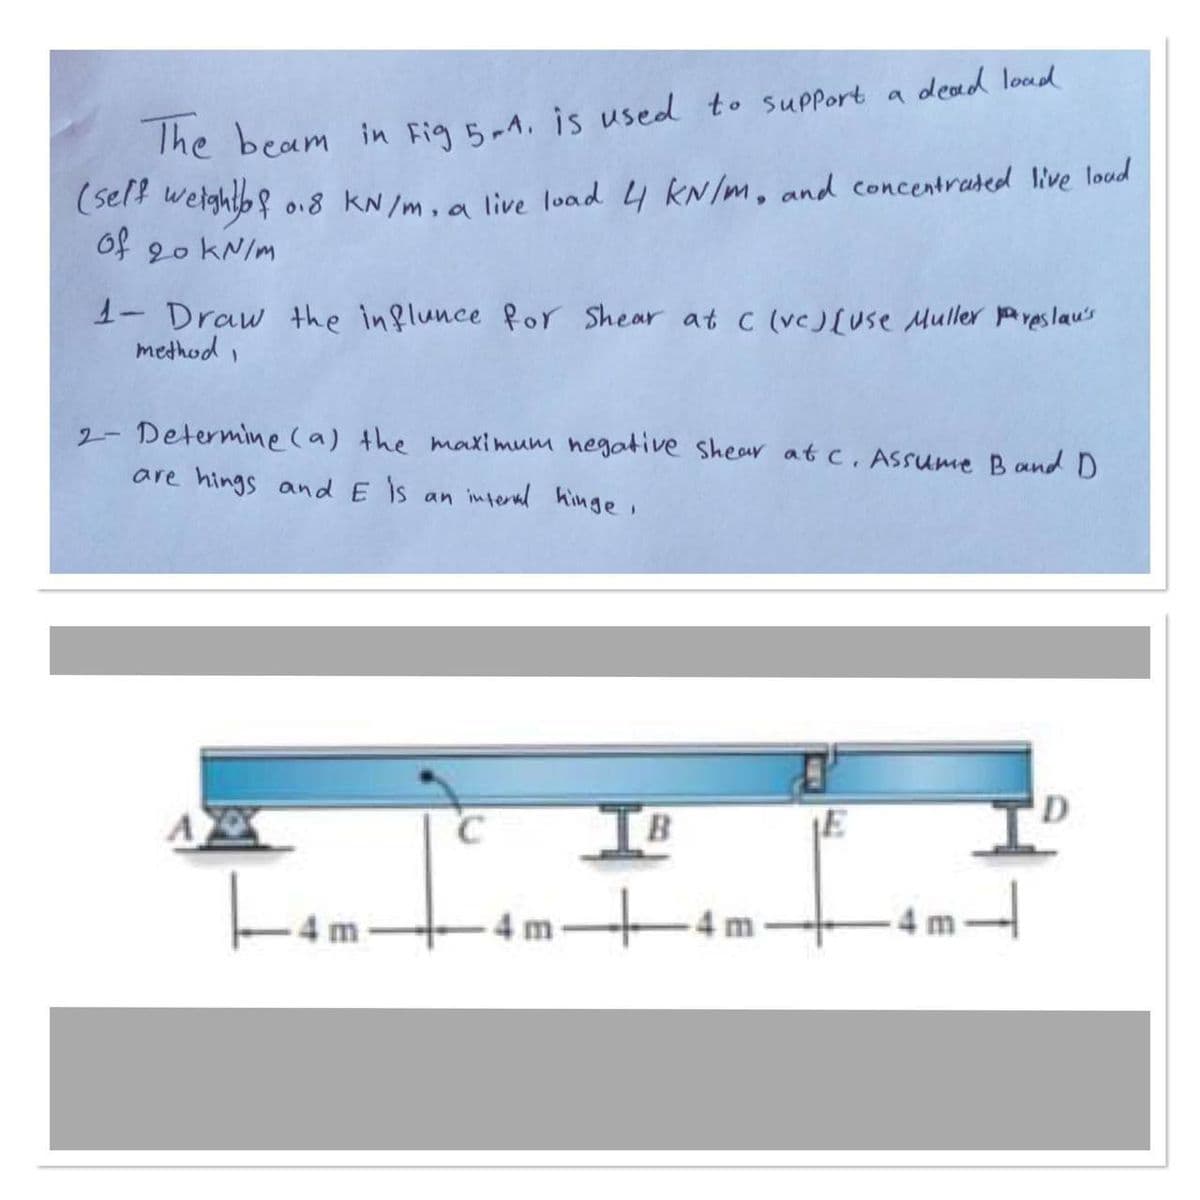 The beam in Fig 5-1. is used to support a dead load
(self weight of 0.8 kN/m, a live load 4 kN/m, and concentrated live loud
of 20 kN/m
1- Draw the influnce for Shear at C (vc) [use Muller preslau's
method,
2- Determine (a) the maximum negative shear at c. Assume Band D
are hings and E is an interval hinge,
|--4m
C
IB
4n
E
T
D